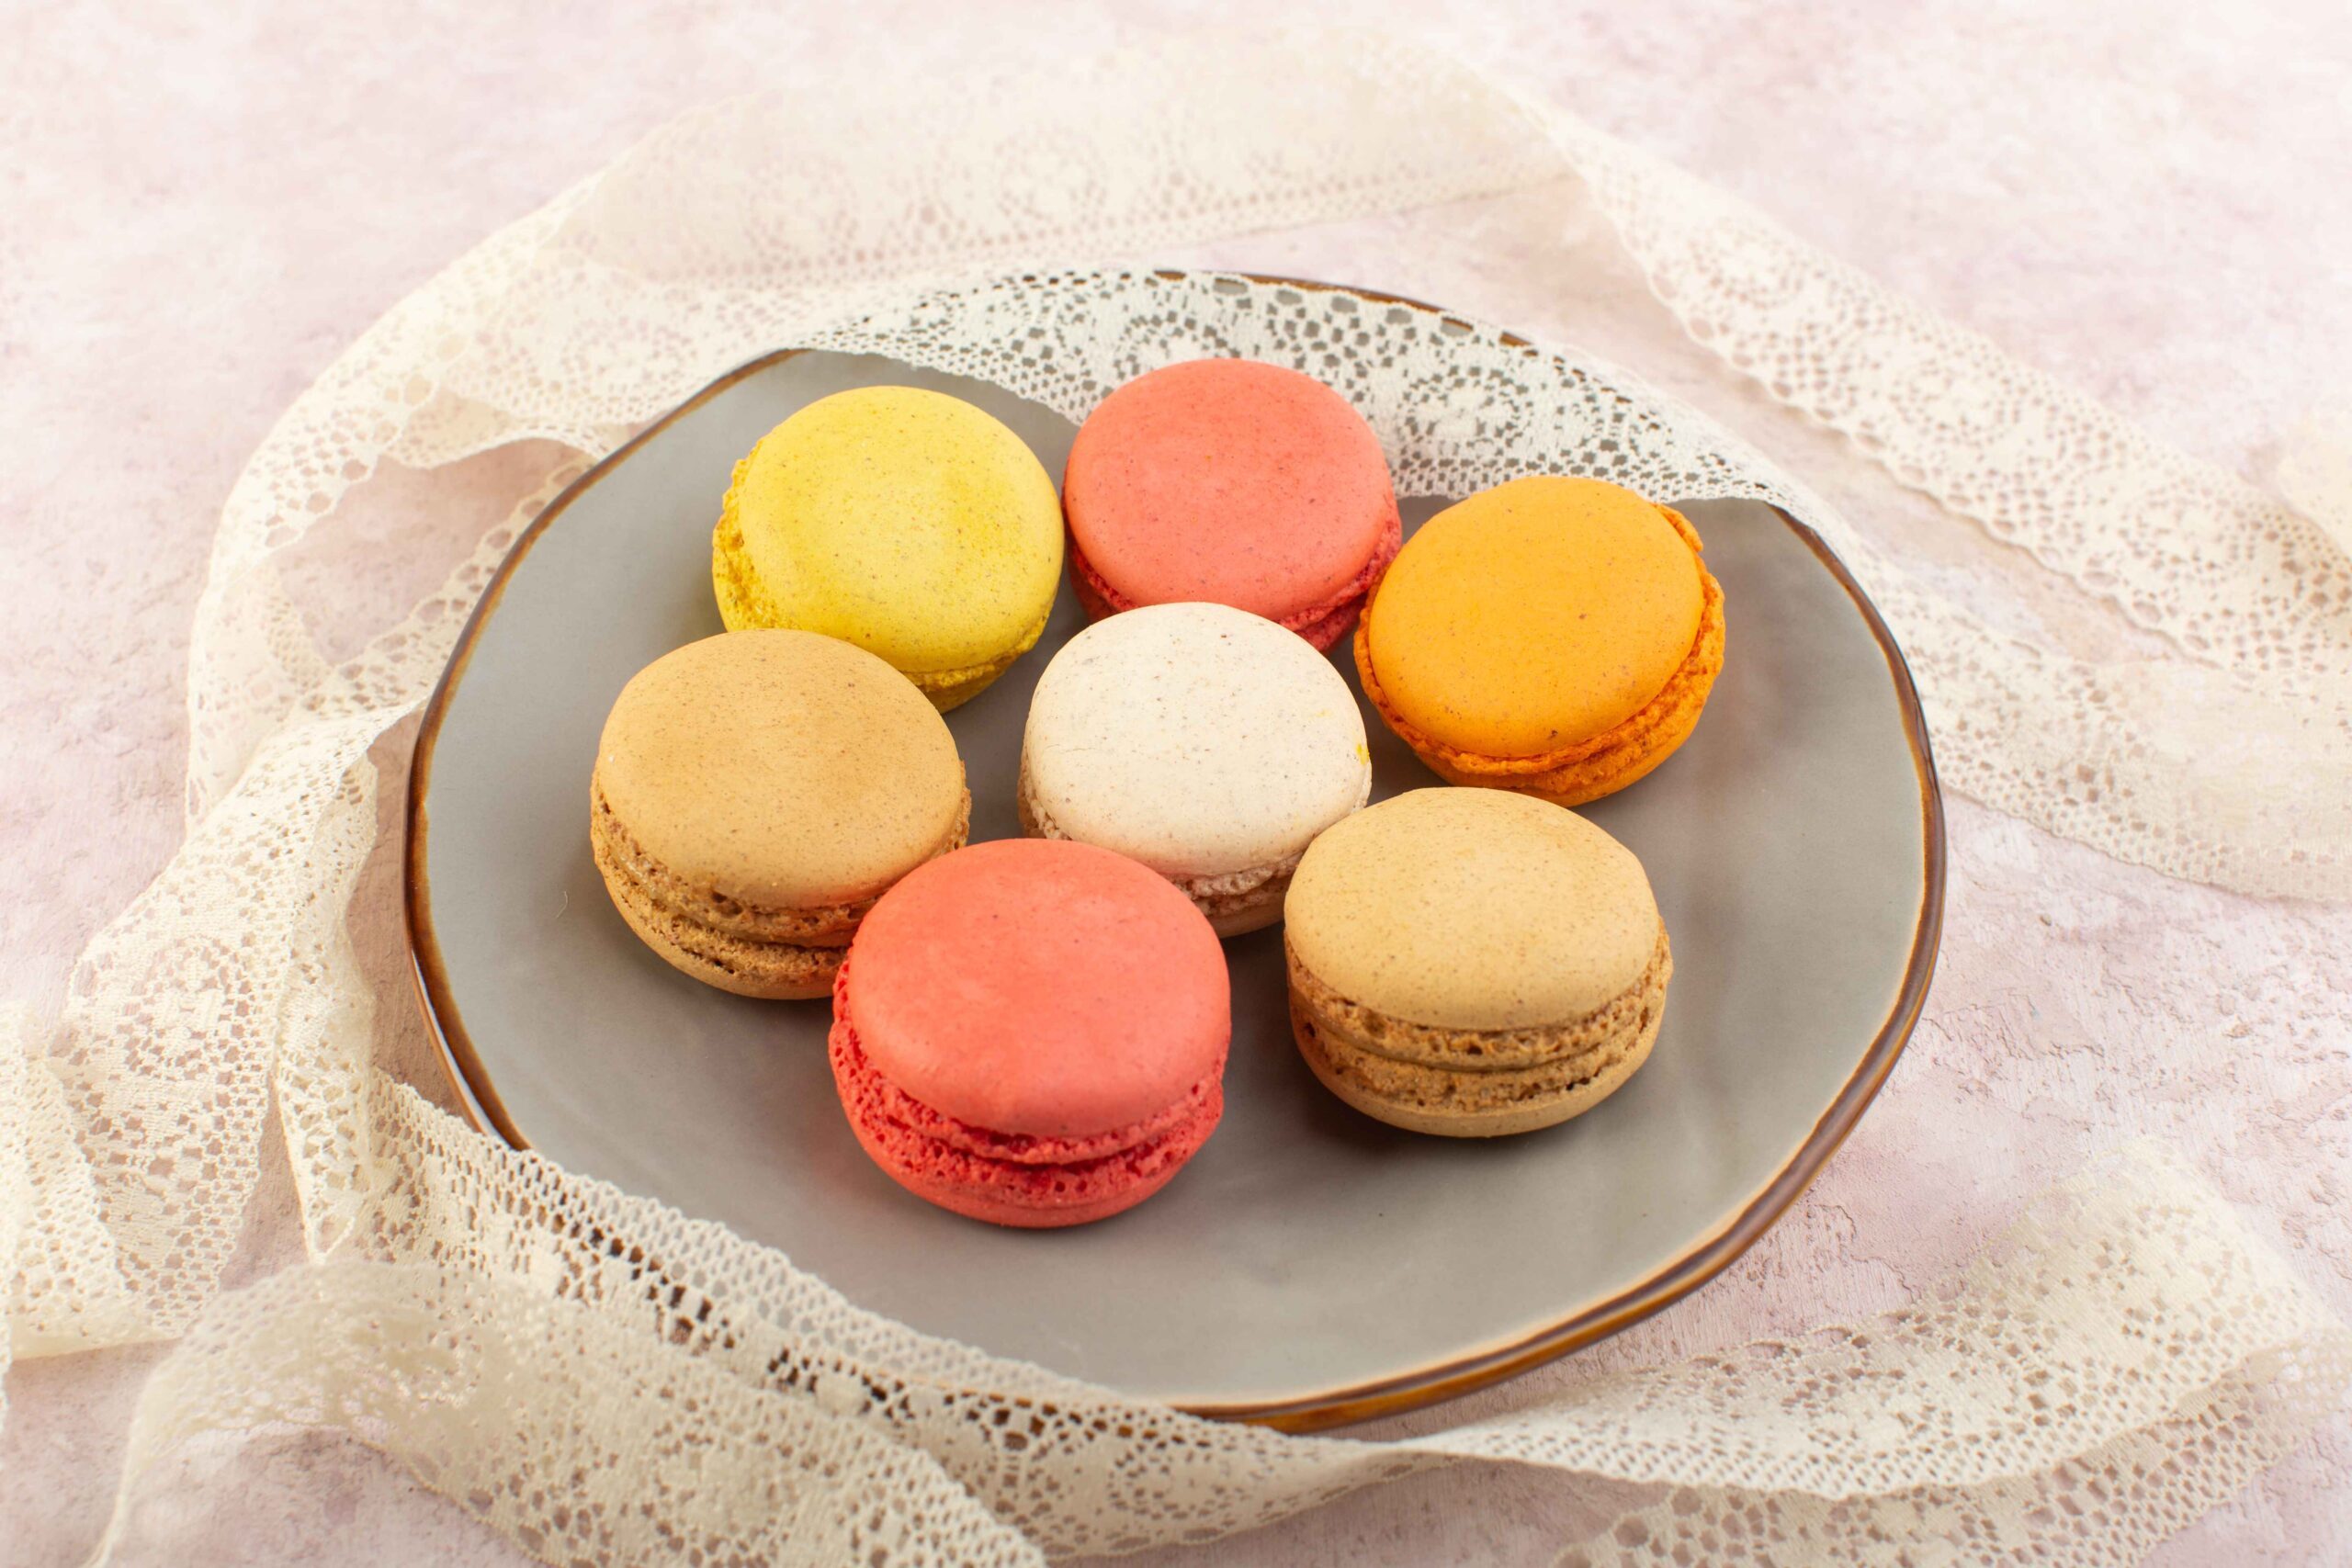 top-view-french-macarons-round-yummy-inside-plate-pink-table-cake-biscuit-sugar-sweet (1)